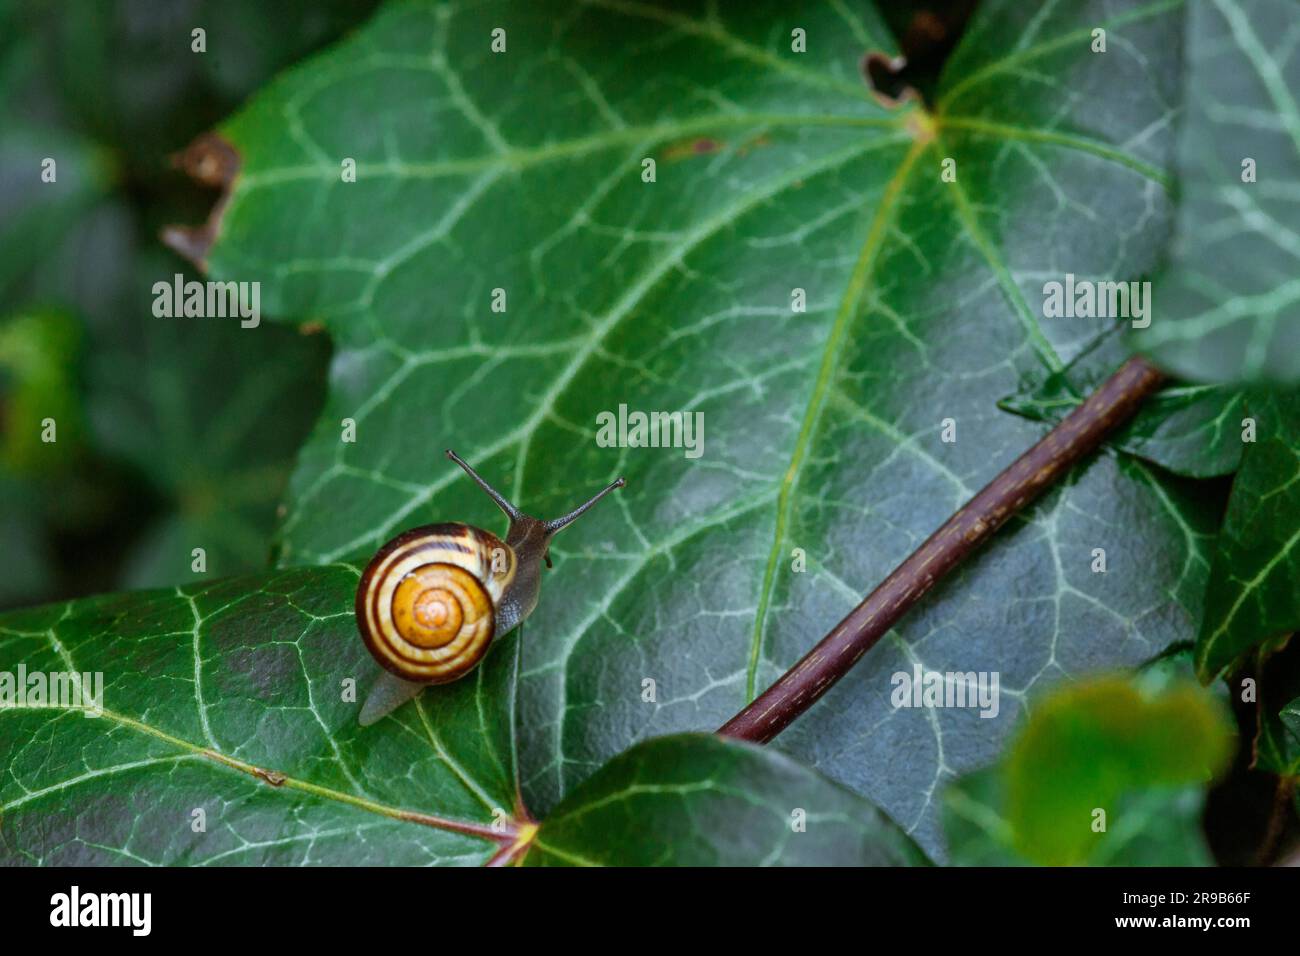 Snail on a green ivy leaf in a garden Stock Photo